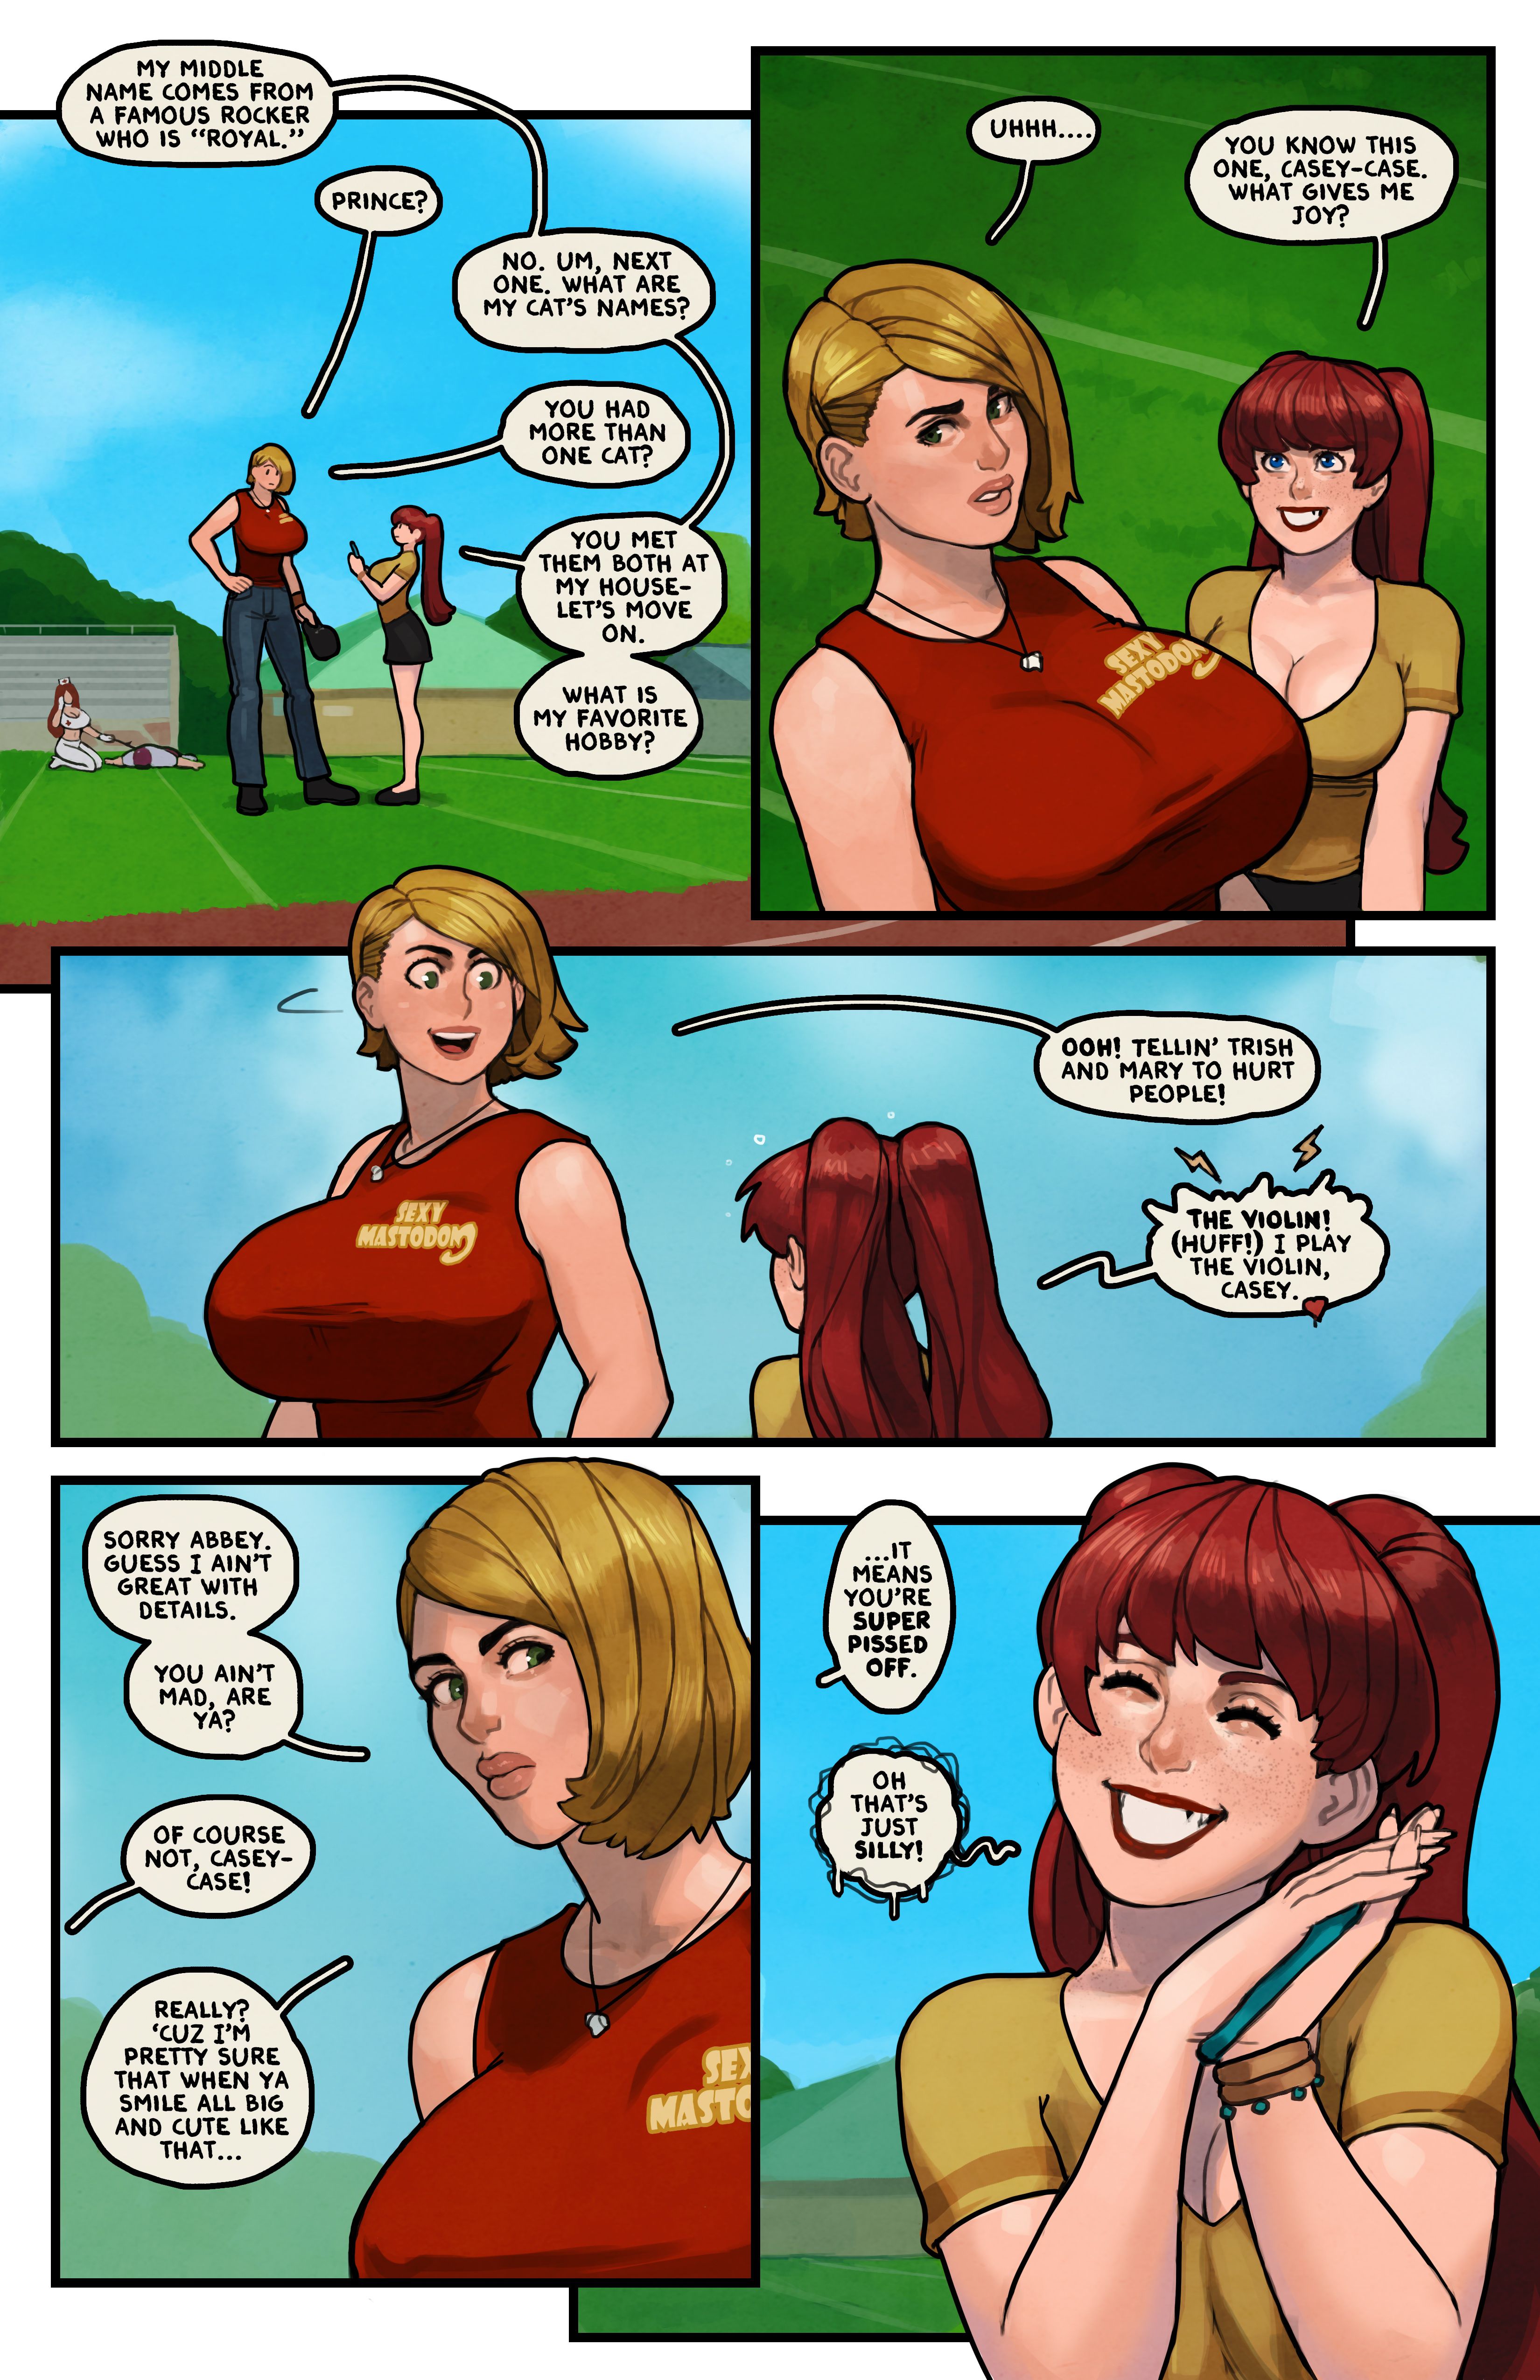 This Romantic World [Reinbach] - 7 . This Romantic World - Physically  Active - Chapter 7 [Reinbach] - AllPornComic